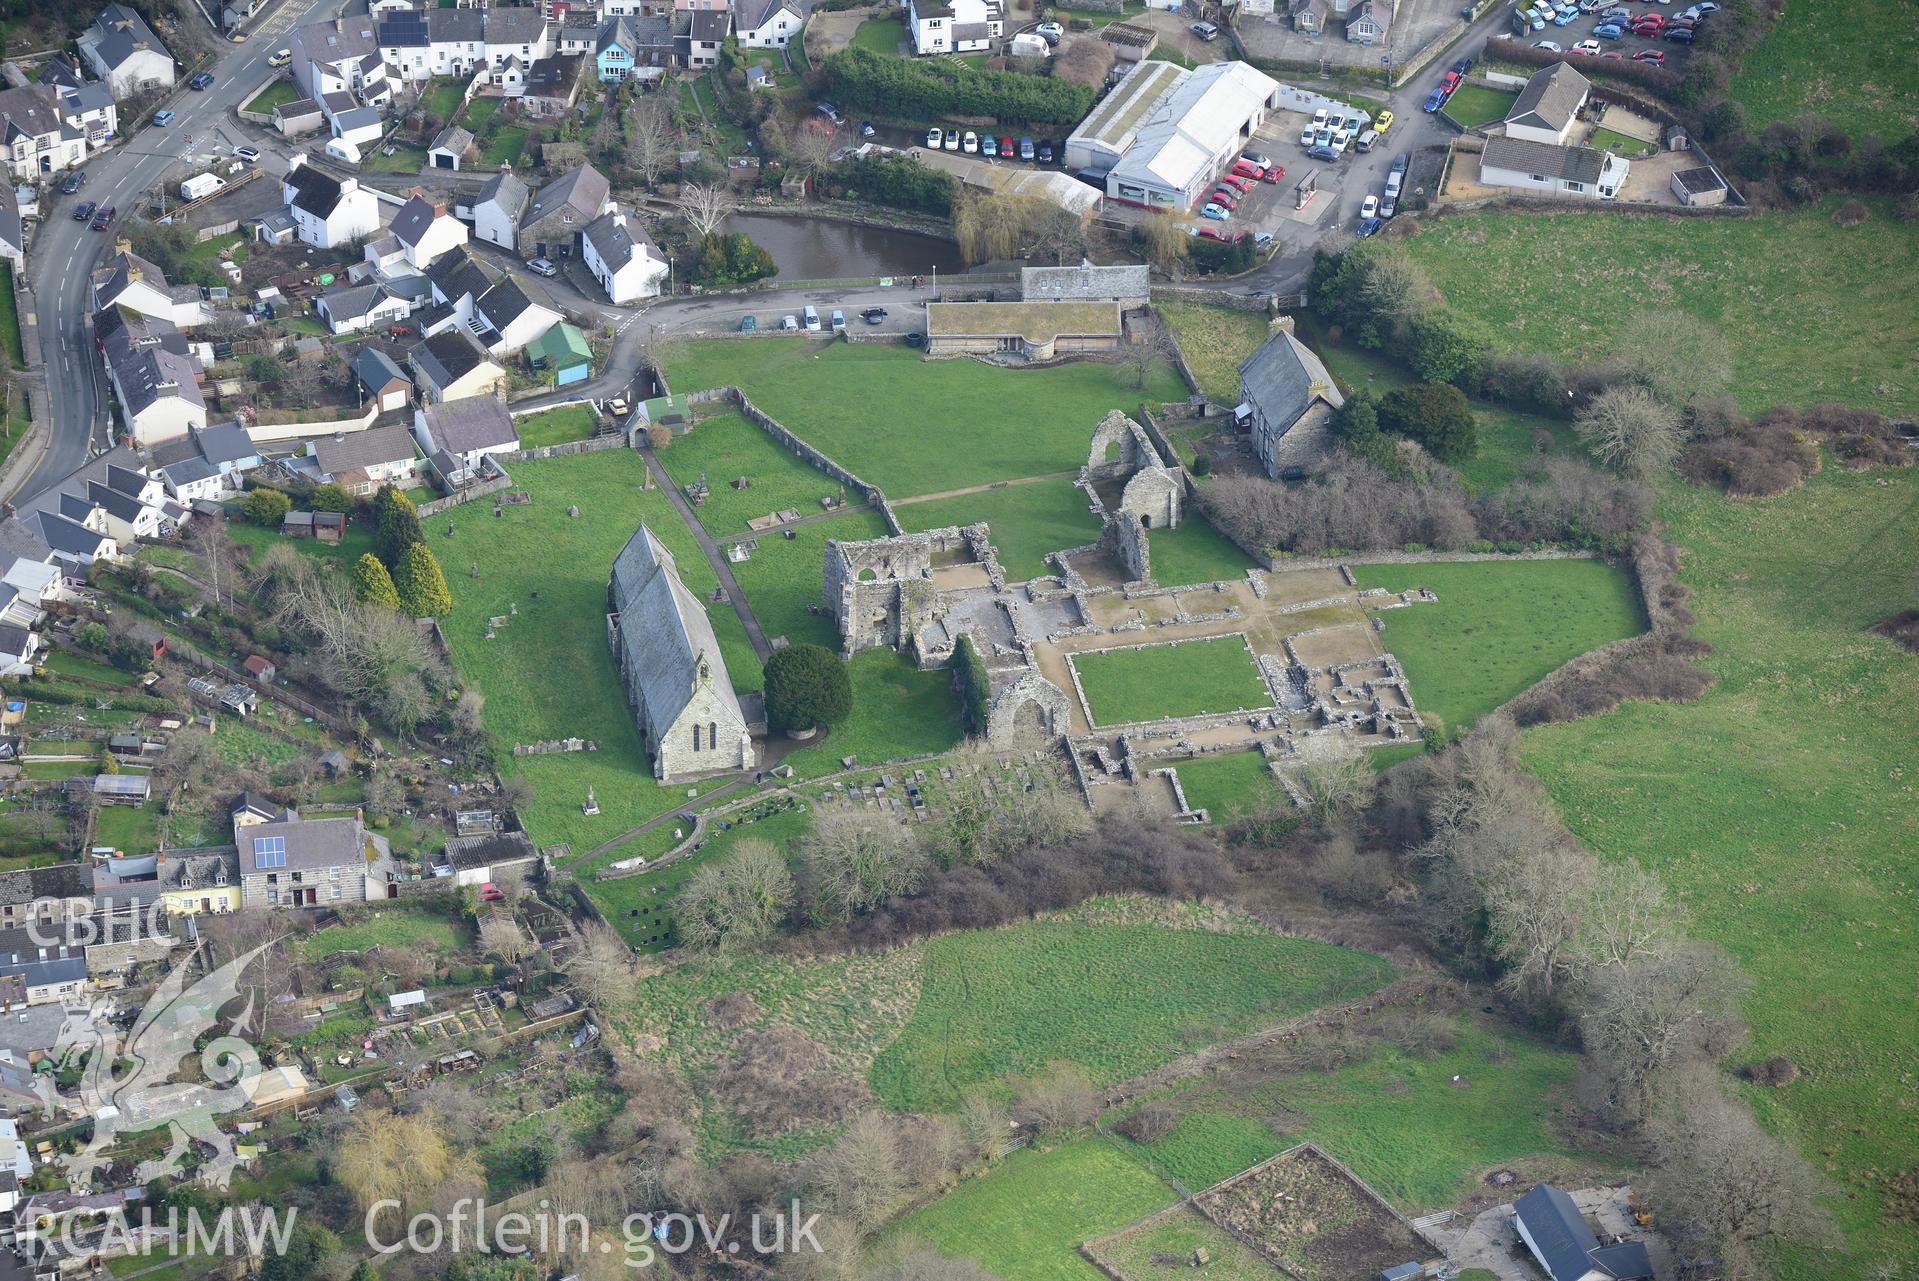 St. Dogmael's Abbey; St. Thomas the Apostle Church; The Vicarage and the Vicarage Stables and Coach House, St. Dogmaels. Oblique aerial photograph taken during the Royal Commission's programme of archaeological aerial reconnaissance by Toby Driver on 13th March 2015.